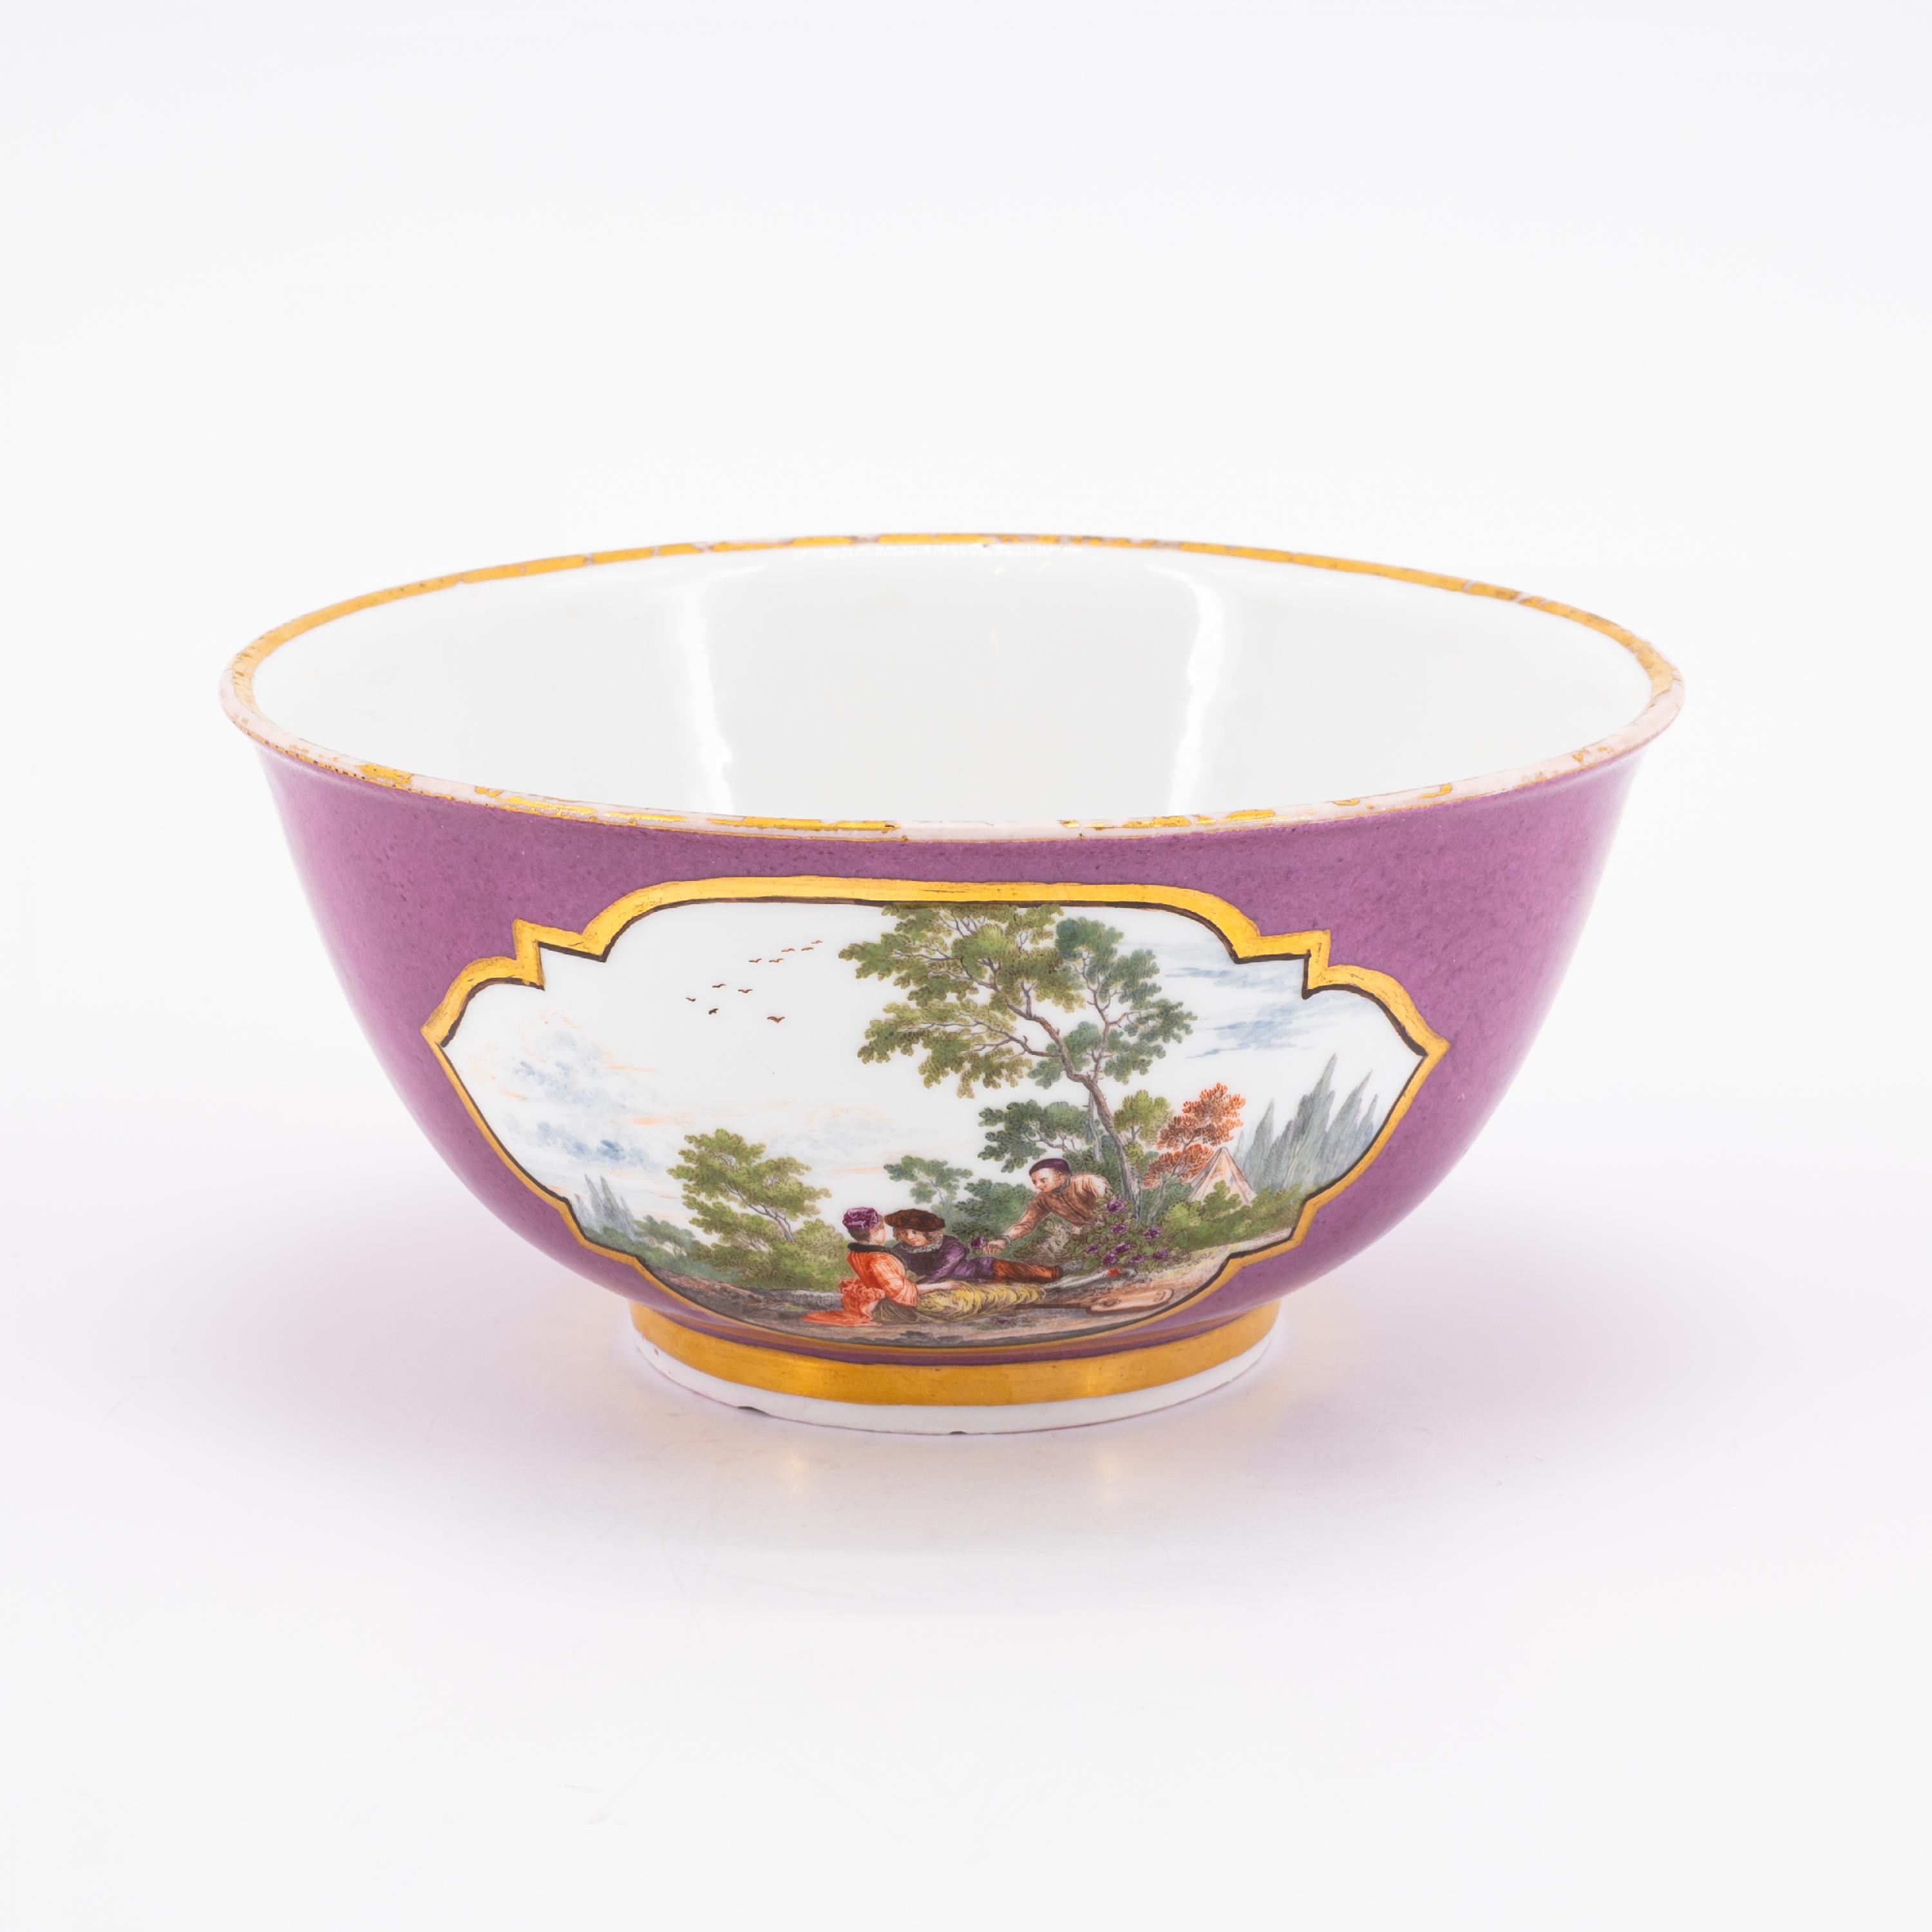 PORCELAIN SLOP BOWL, CUP WITH SAUCER AND PURPLE GROUND AND GALLANT PARK SCENES - Image 8 of 11